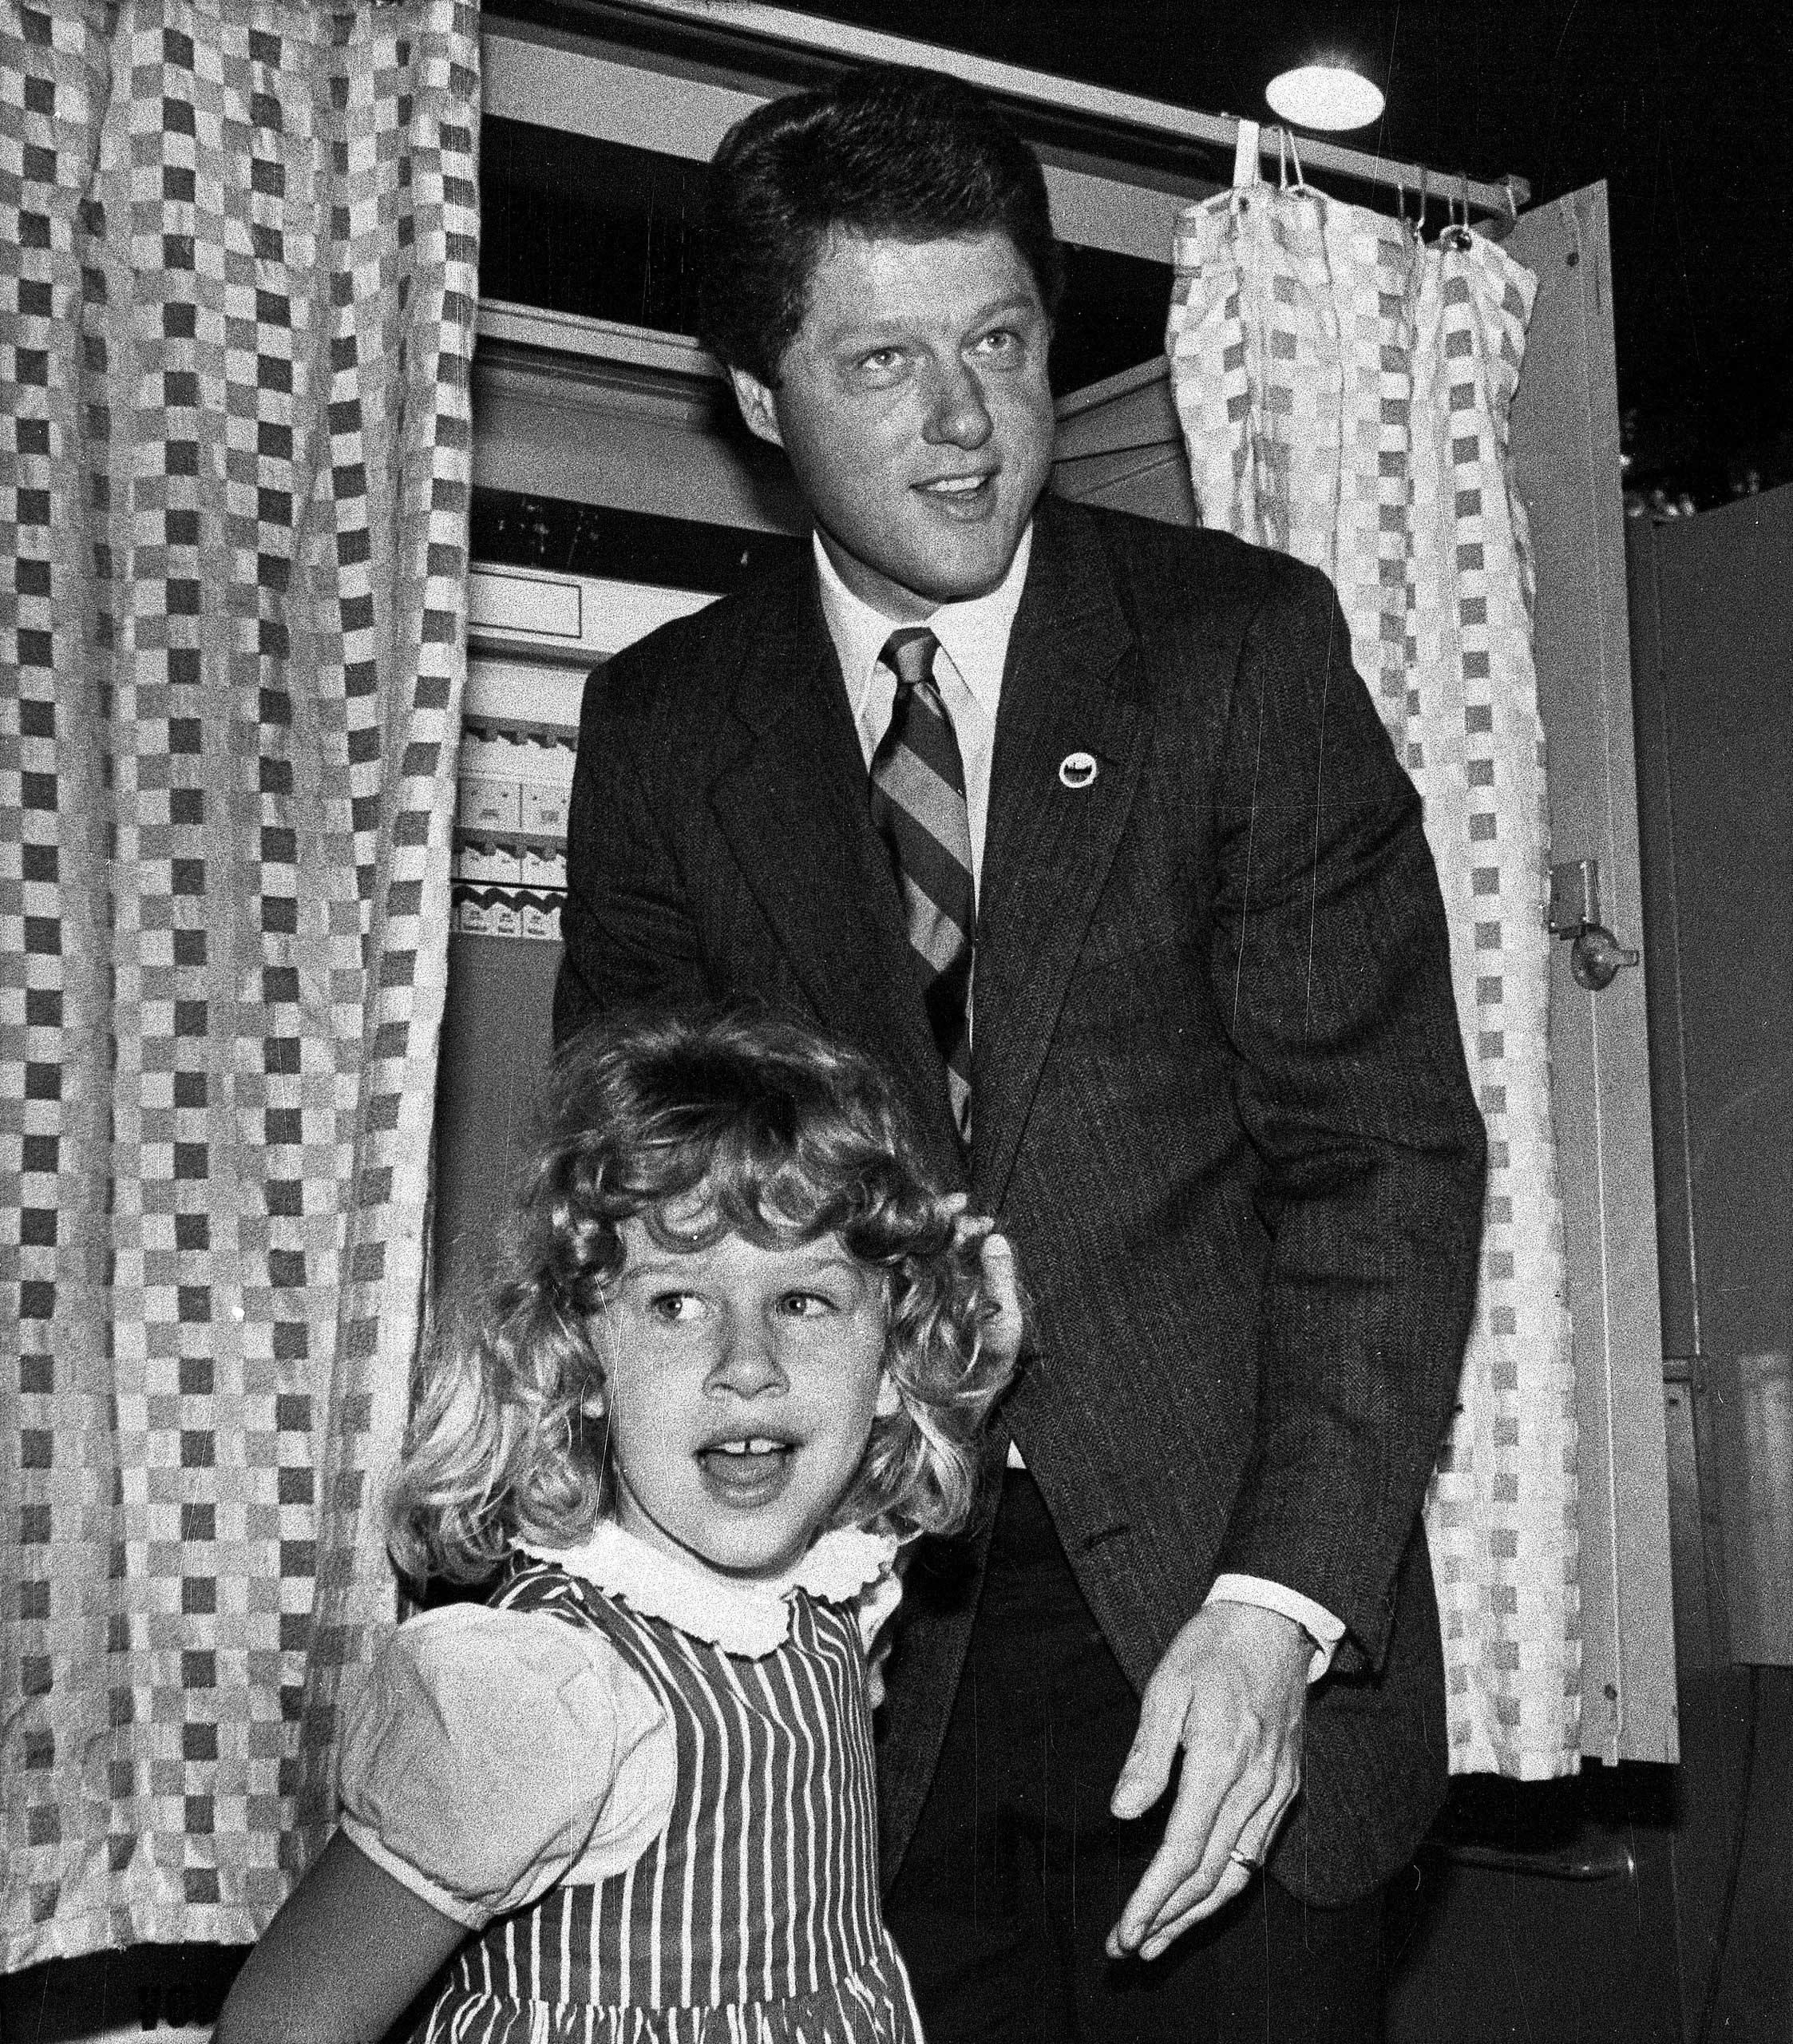 Arkansas Gov. Bill Clinton and daughter, Chelsea, 6, leave the voting booth after the governor cast his vote during the Democratic primary in Little Rock, Ark., on May 27, 1986.